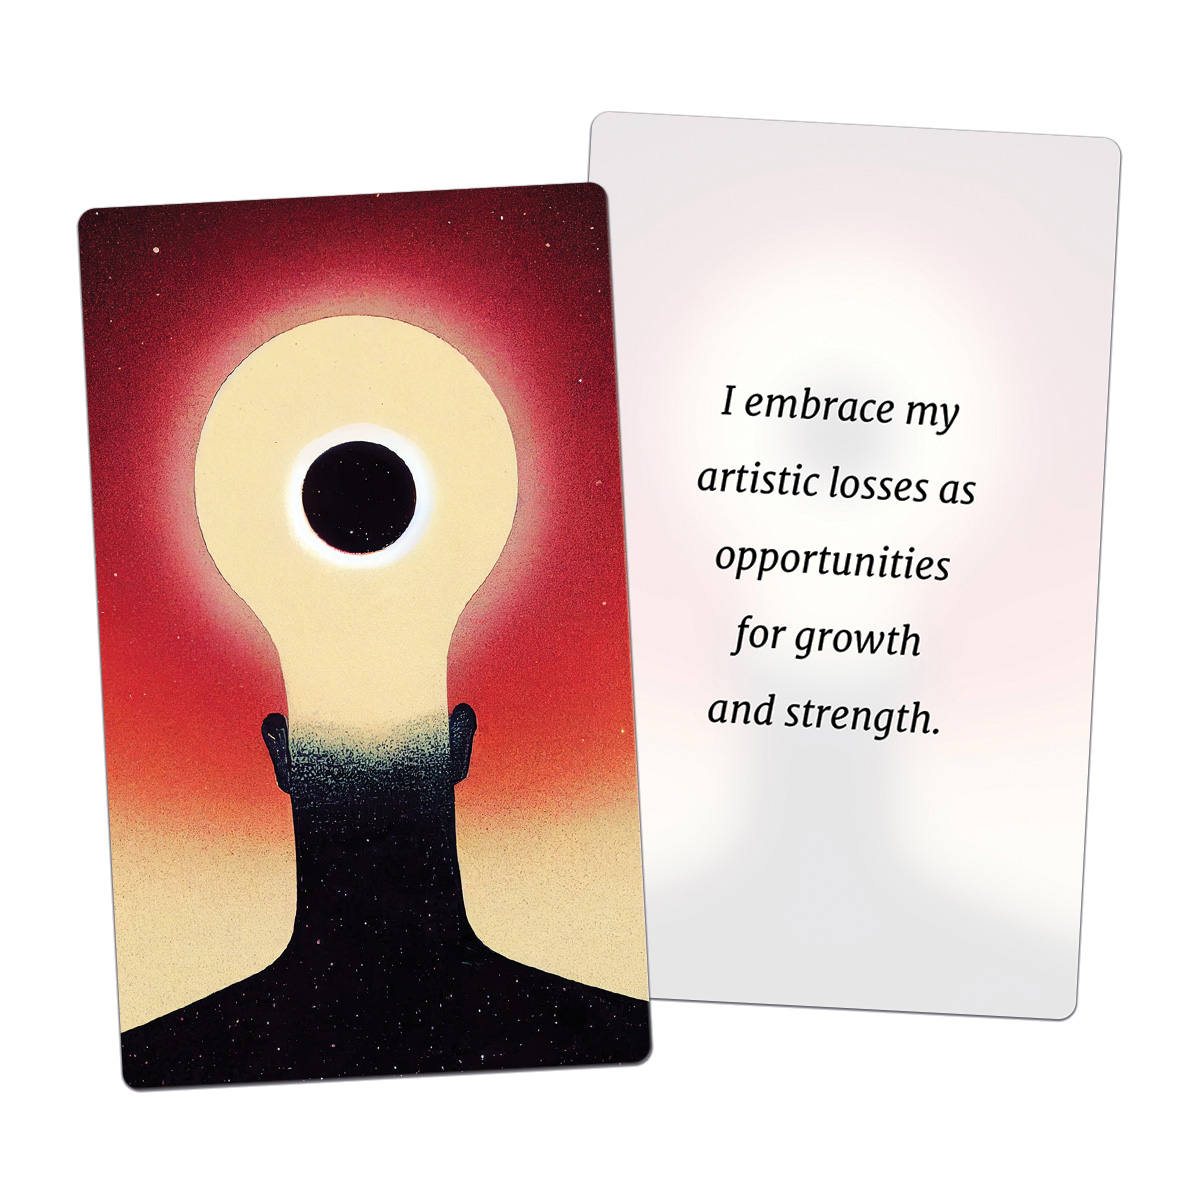 I embrace my artistic losses as opportunities for growth and strength. (AFFIRMATION CARD)